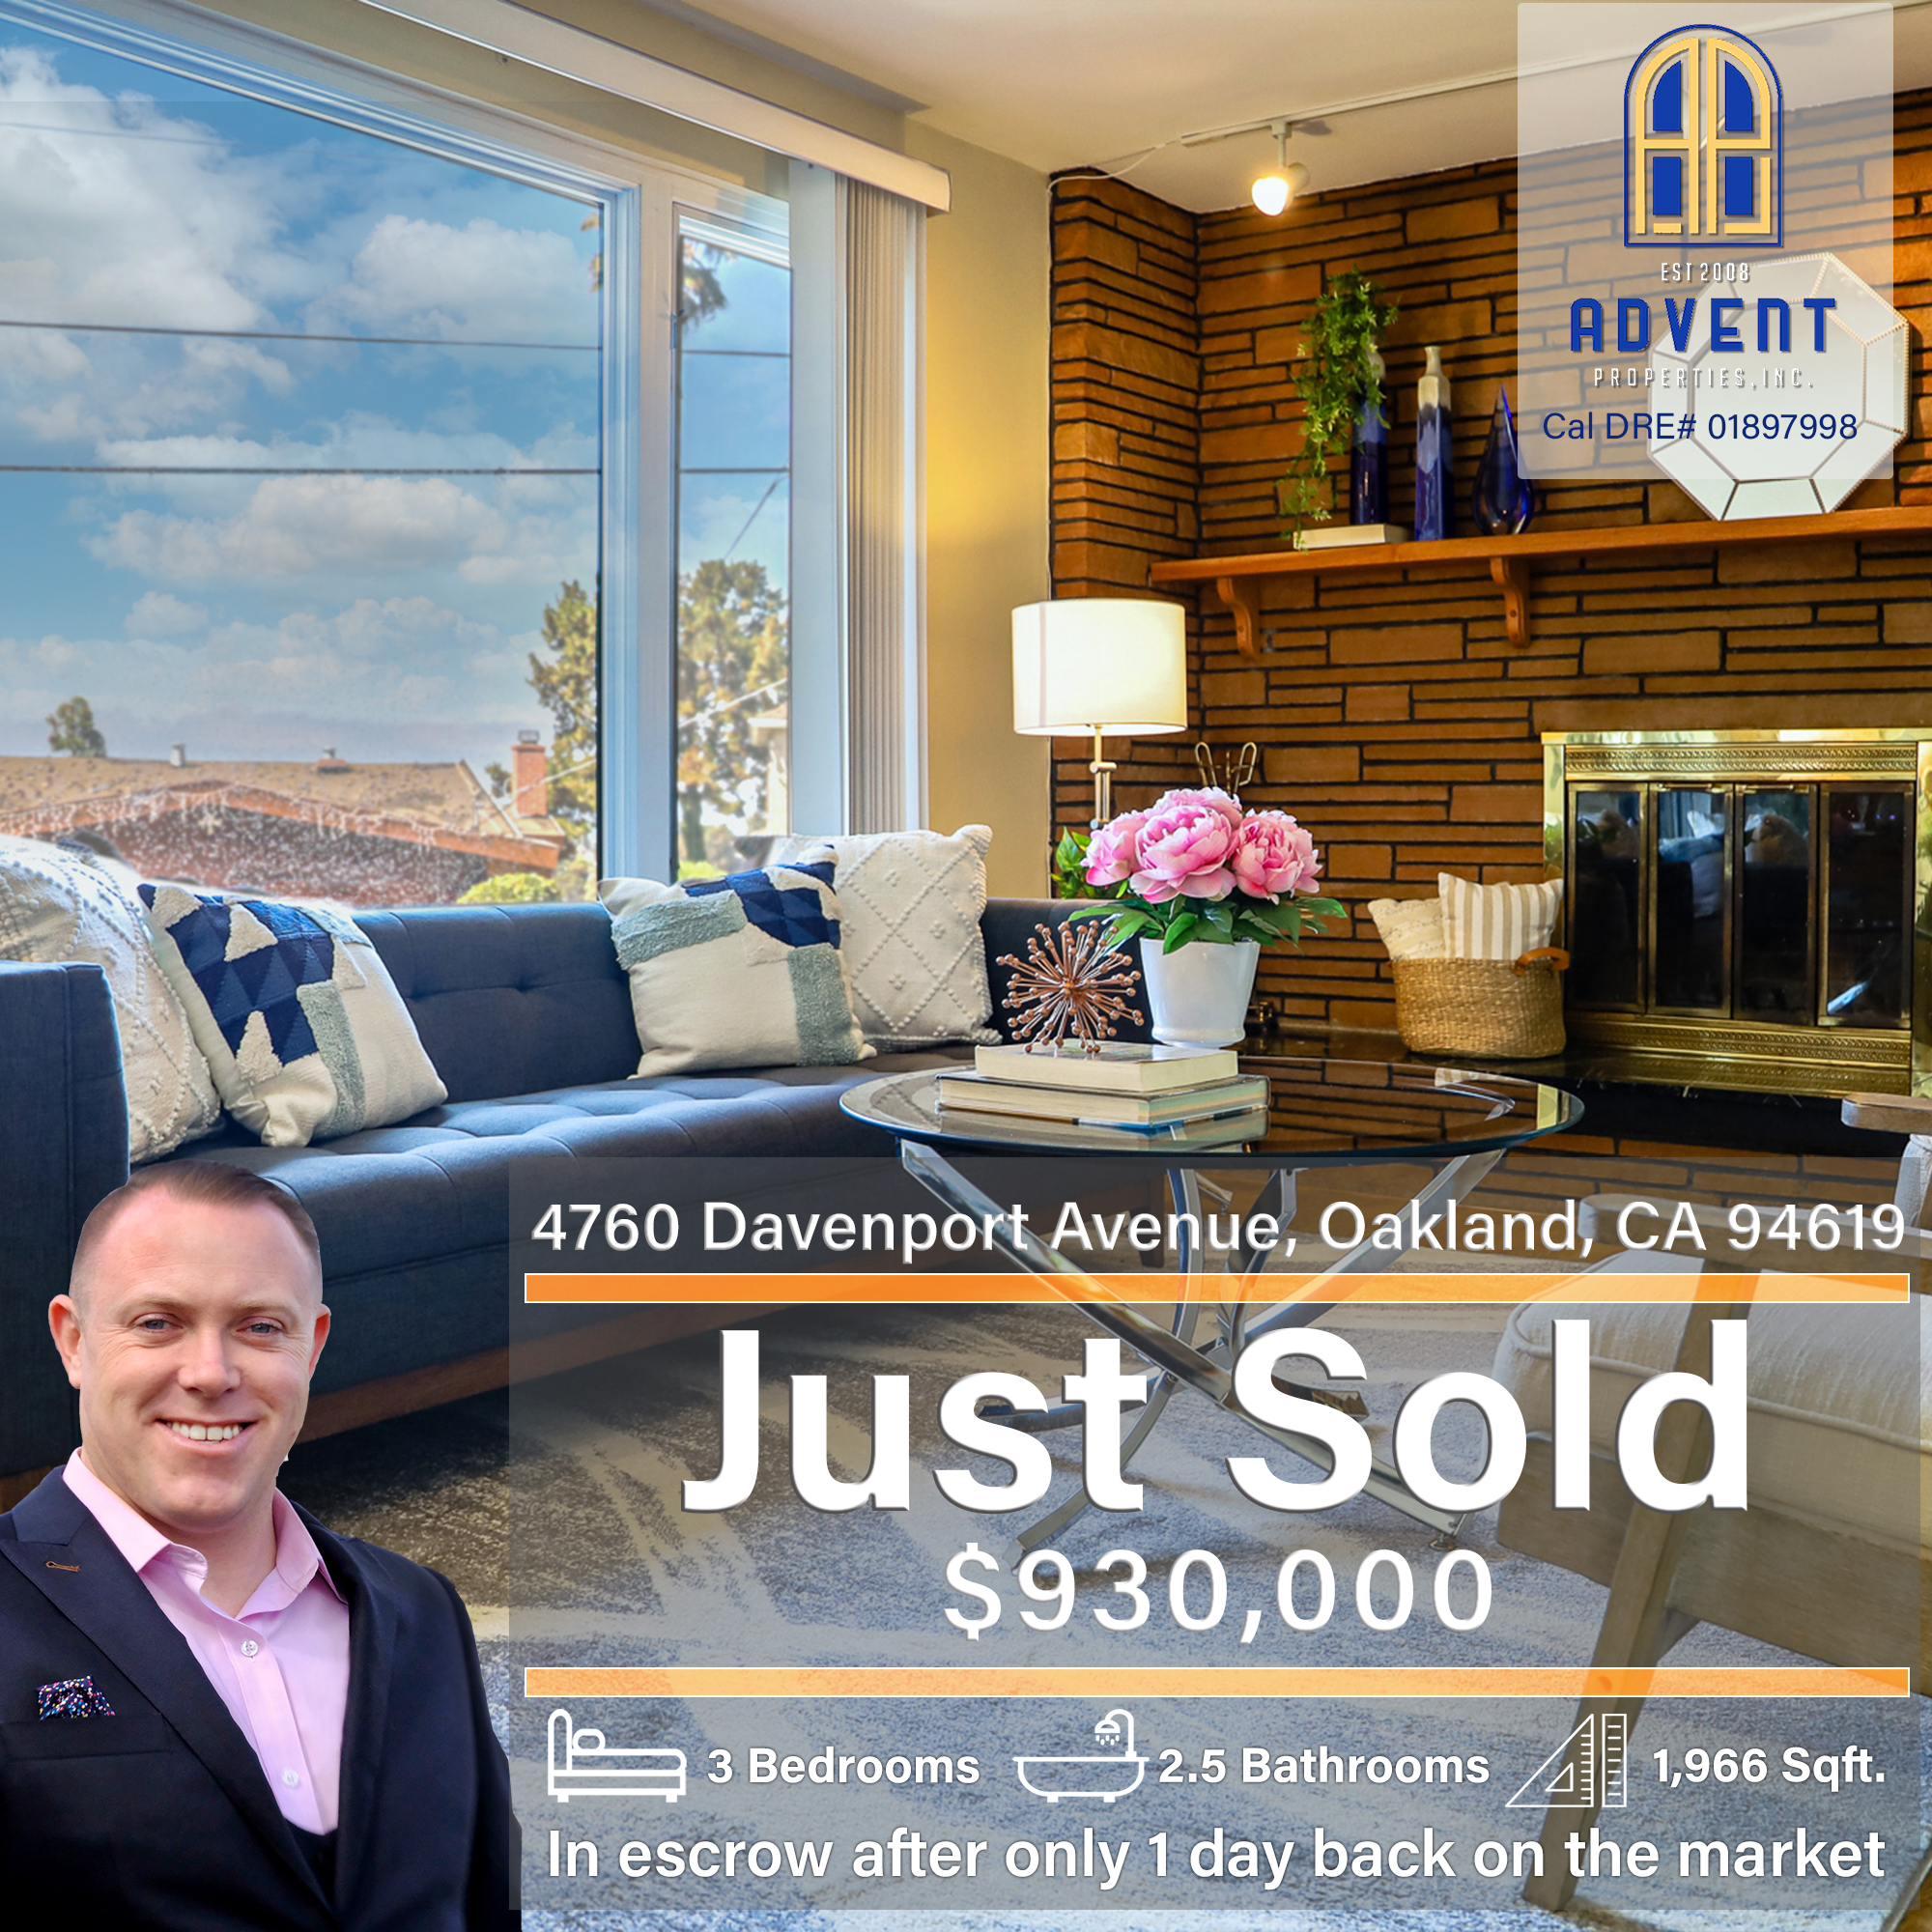 Just Sold by Darryl Glass: 4760 Davenport Avenue, Oakland CA, 94619